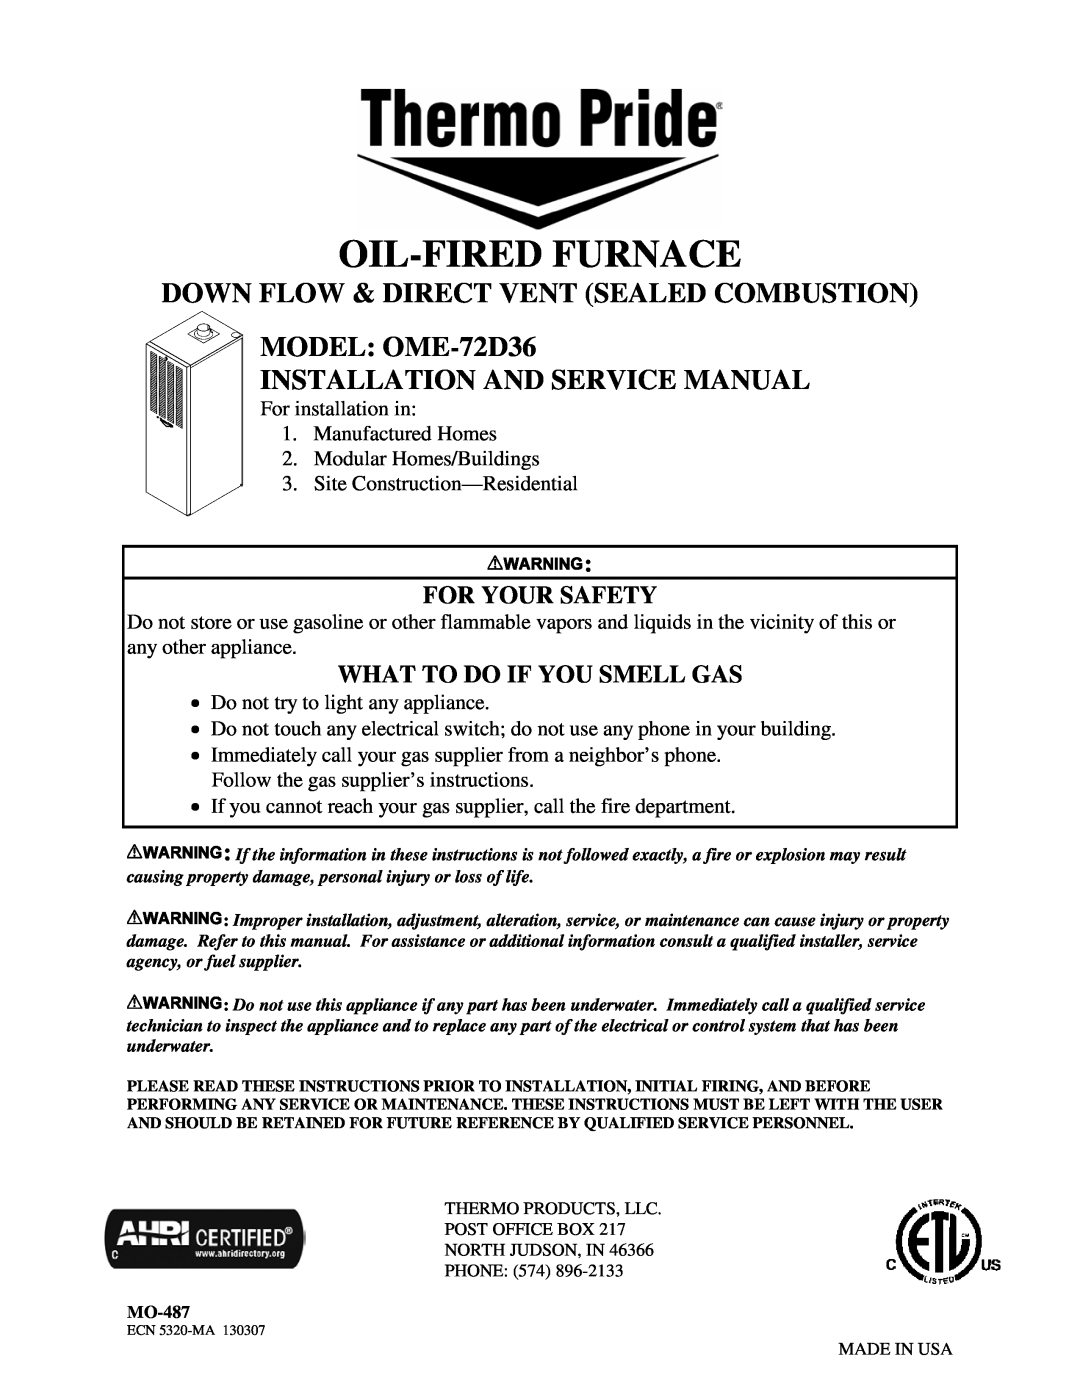 Thermo Products ome-72d36 service manual Oil-Firedfurnace, Down Flow & Direct Vent Sealed Combustion, For Your Safety 